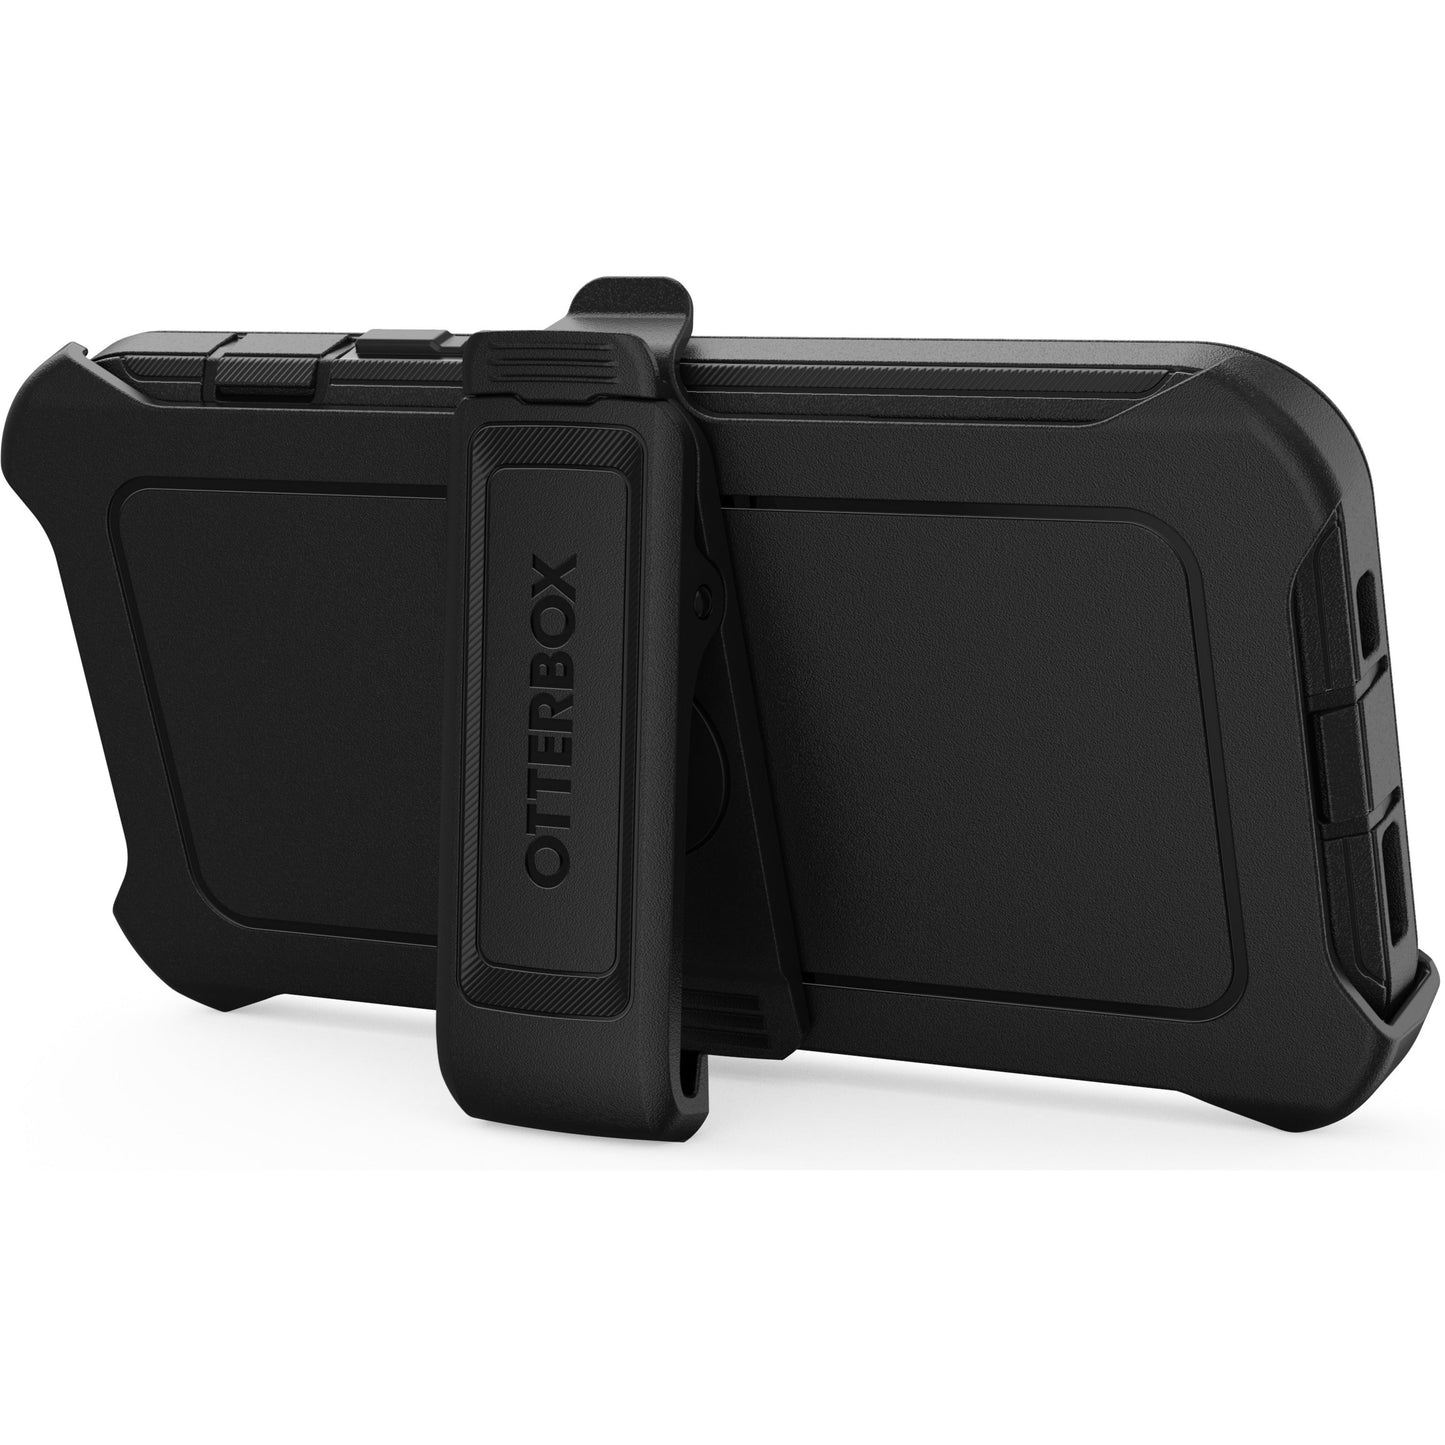 OtterBox Defender Rugged Carrying Case (Holster) Apple iPhone 13 Smartphone - Black